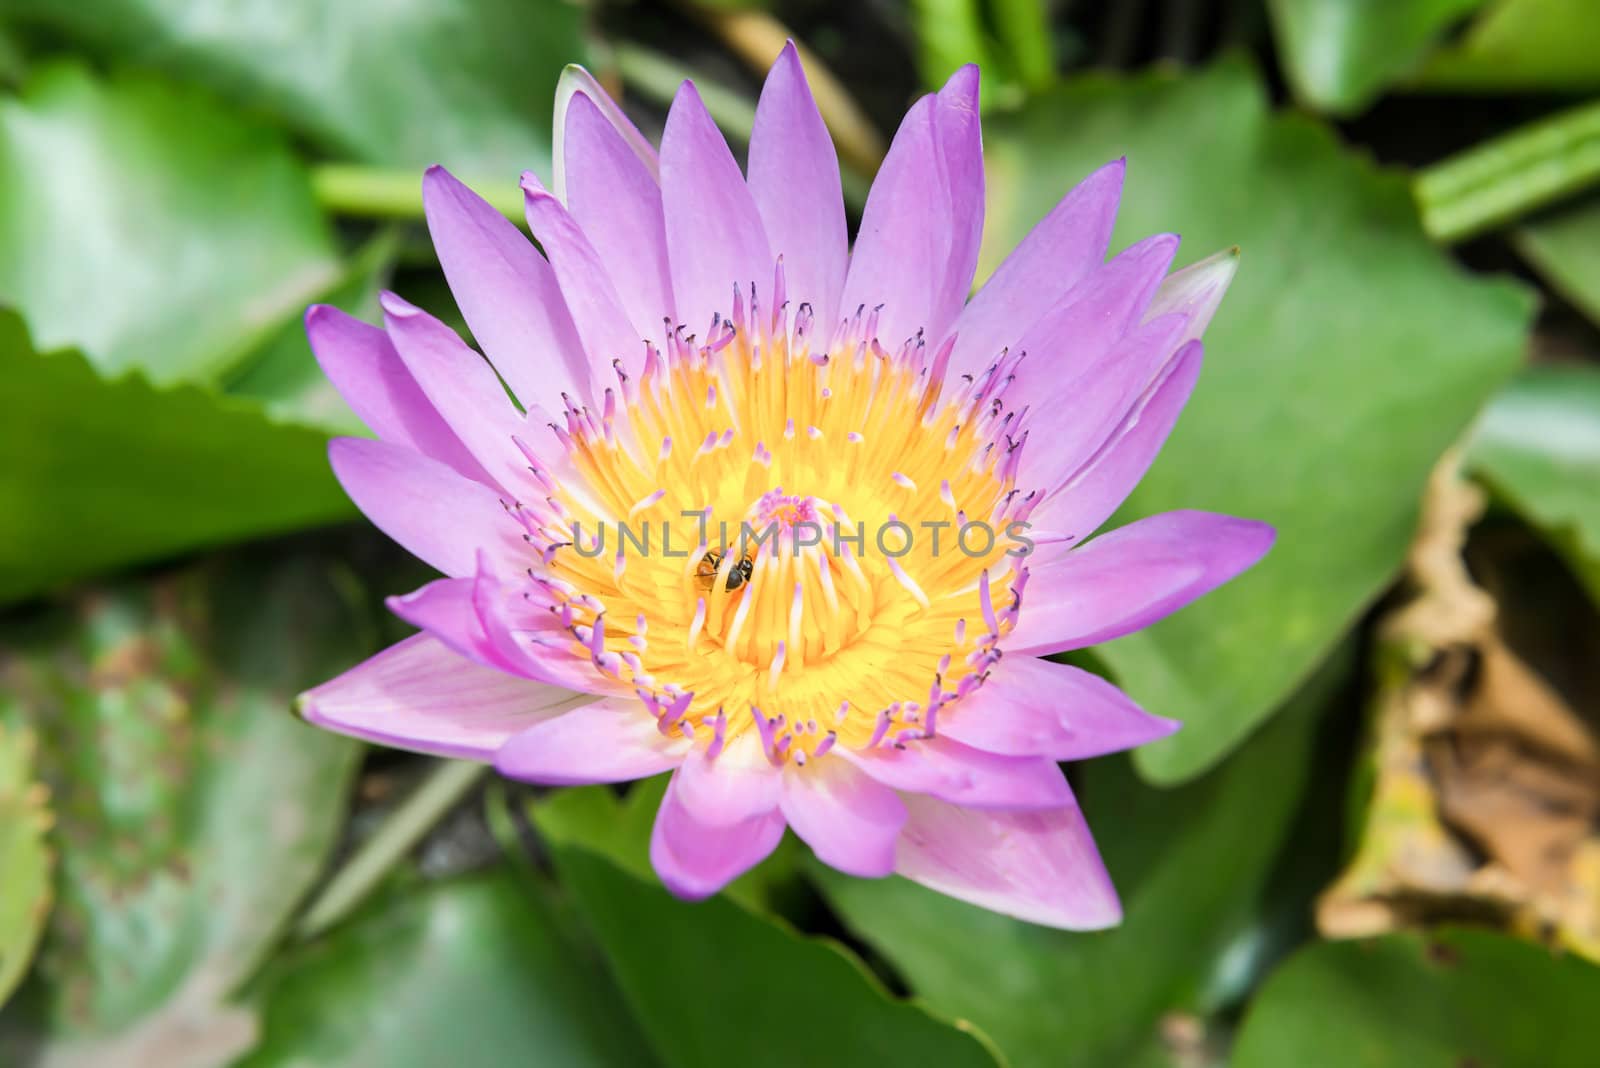 pink lotus or water lily with bee